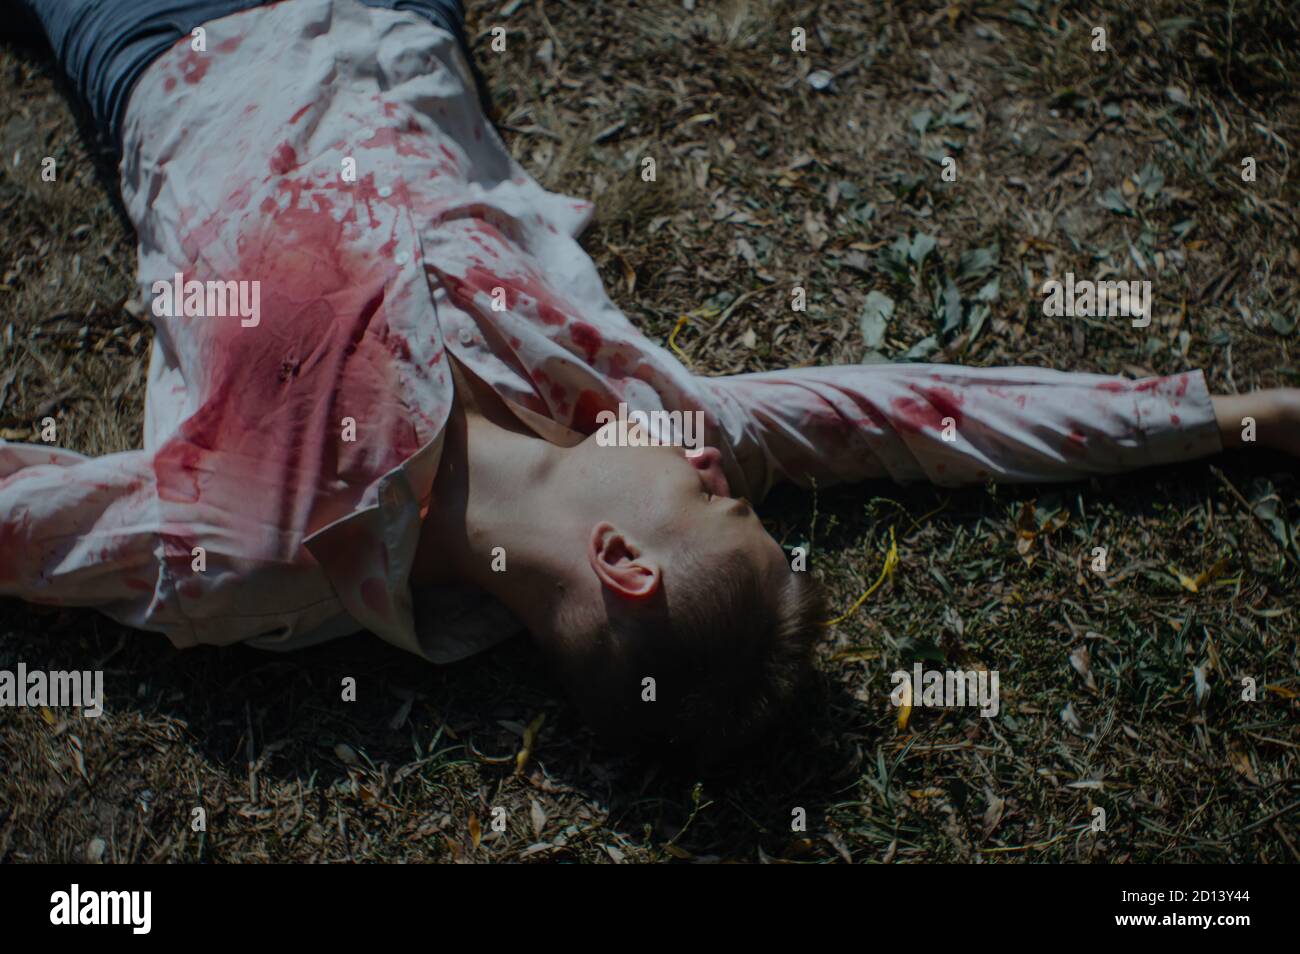 Dead man body lying on the ground in a bloody shirt Stock Photo